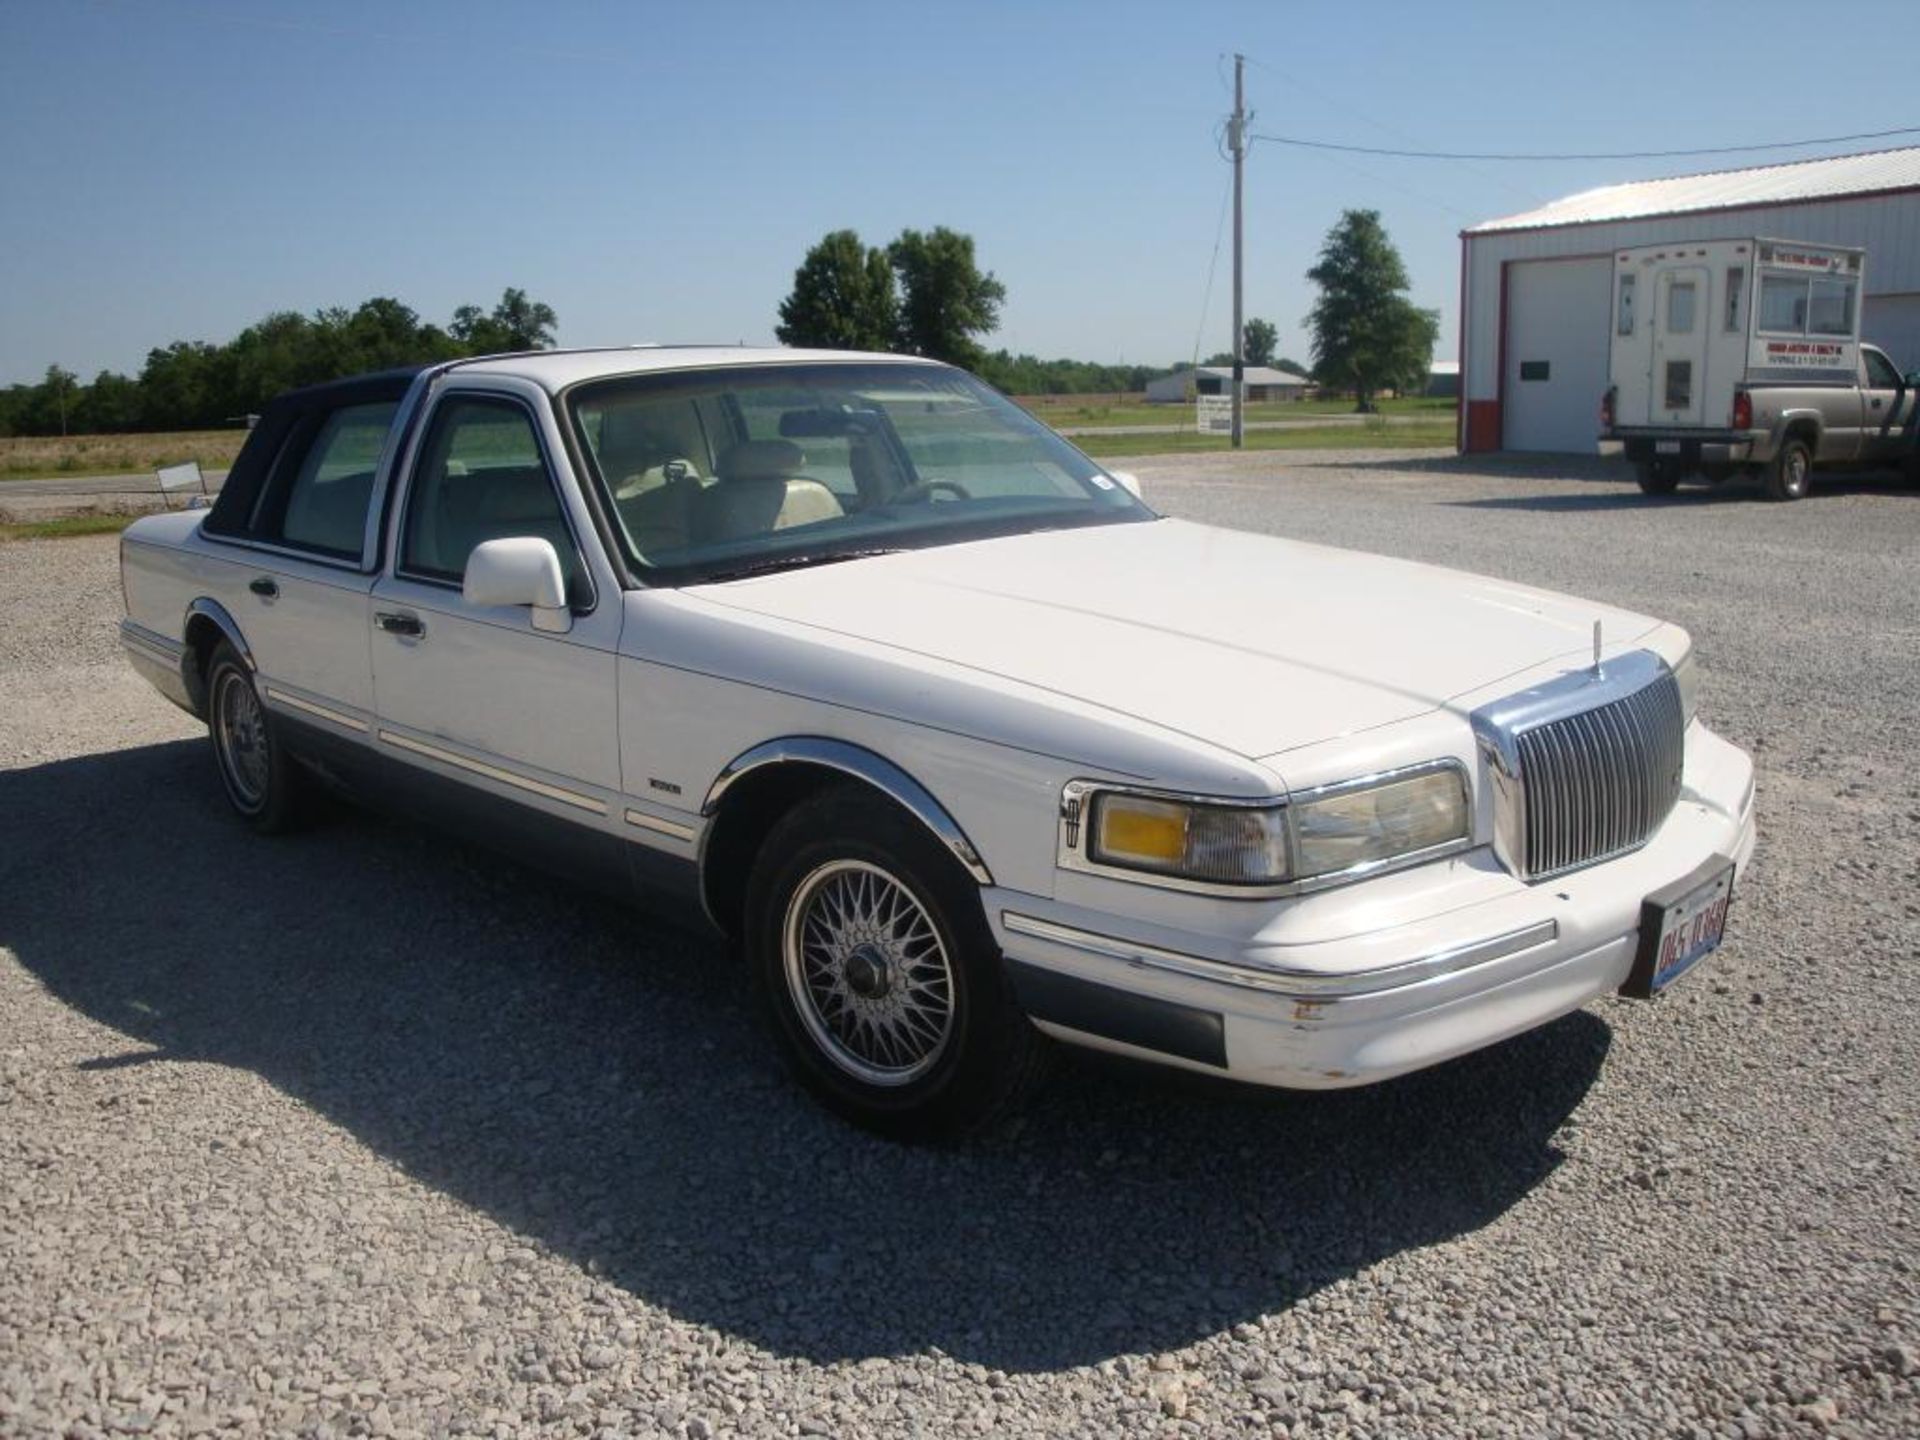 (Title) 1995 Lincoln Towncar,approx. 238,000 miles, Caution-soft brakes, otherwise no issues - Image 5 of 12